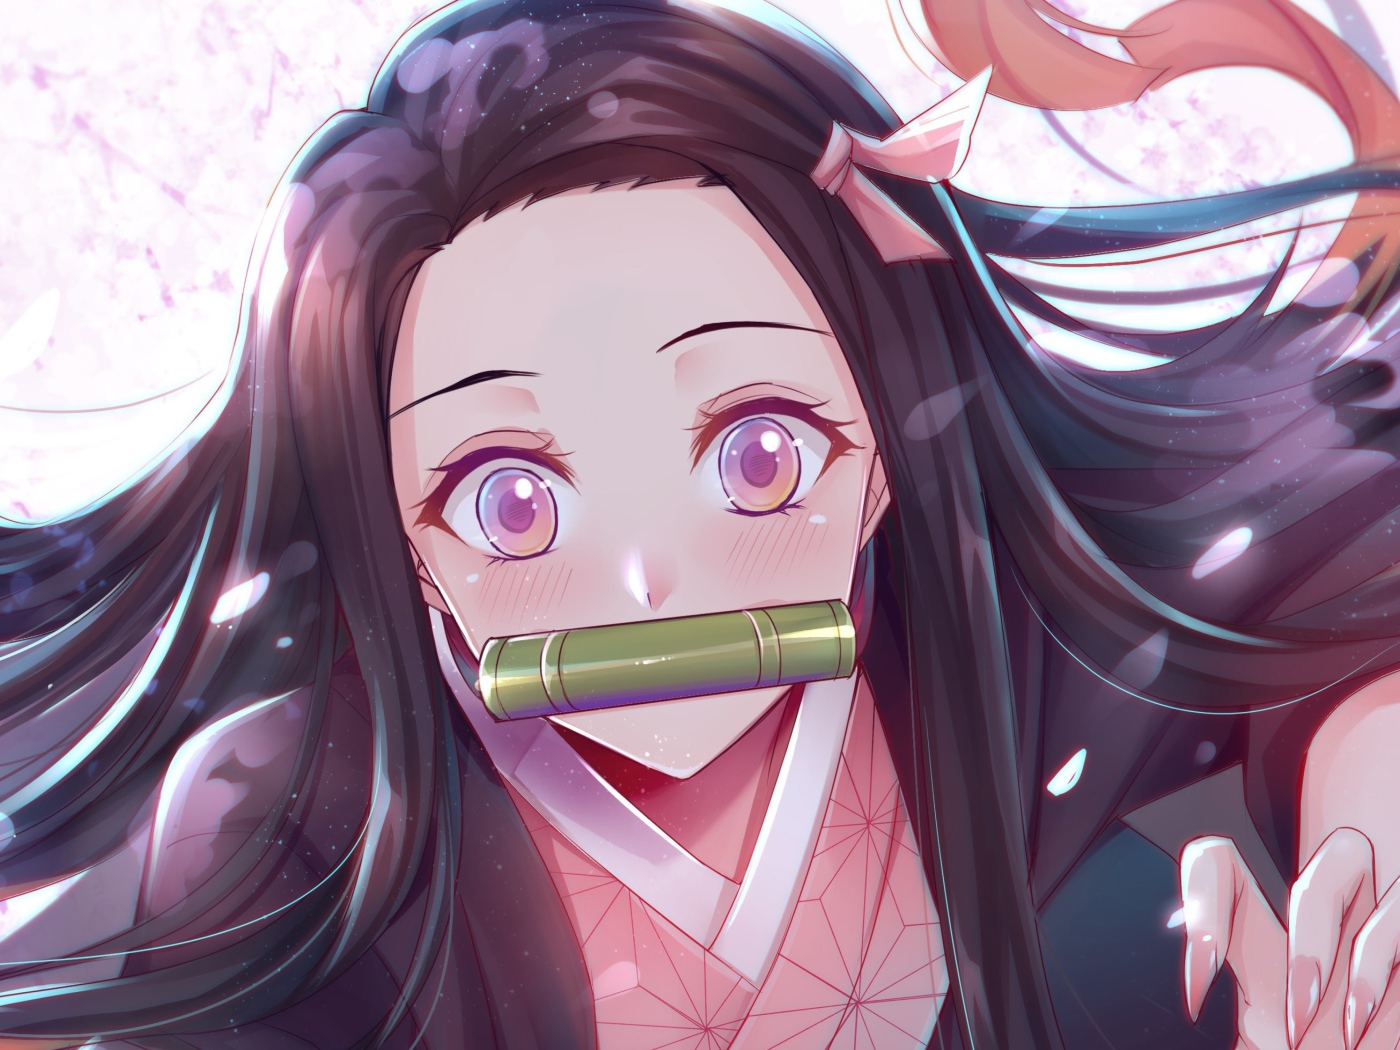 Anime girl with a harmonica in her mouth